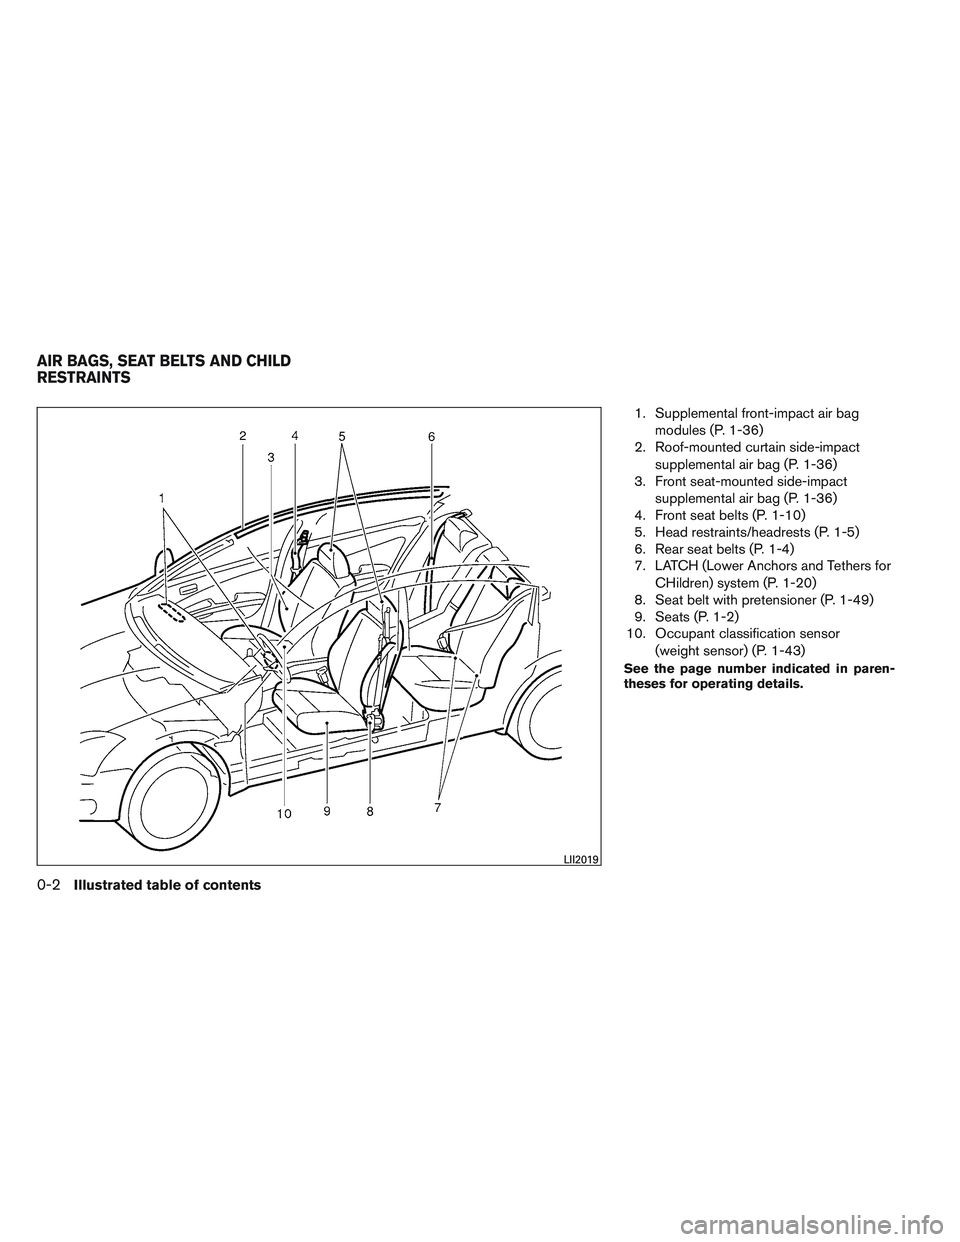 NISSAN VERSA 2014  Owners Manual 1. Supplemental front-impact air bagmodules (P. 1-36)
2. Roof-mounted curtain side-impact
supplemental air bag (P. 1-36)
3. Front seat-mounted side-impact
supplemental air bag (P. 1-36)
4. Front seat 